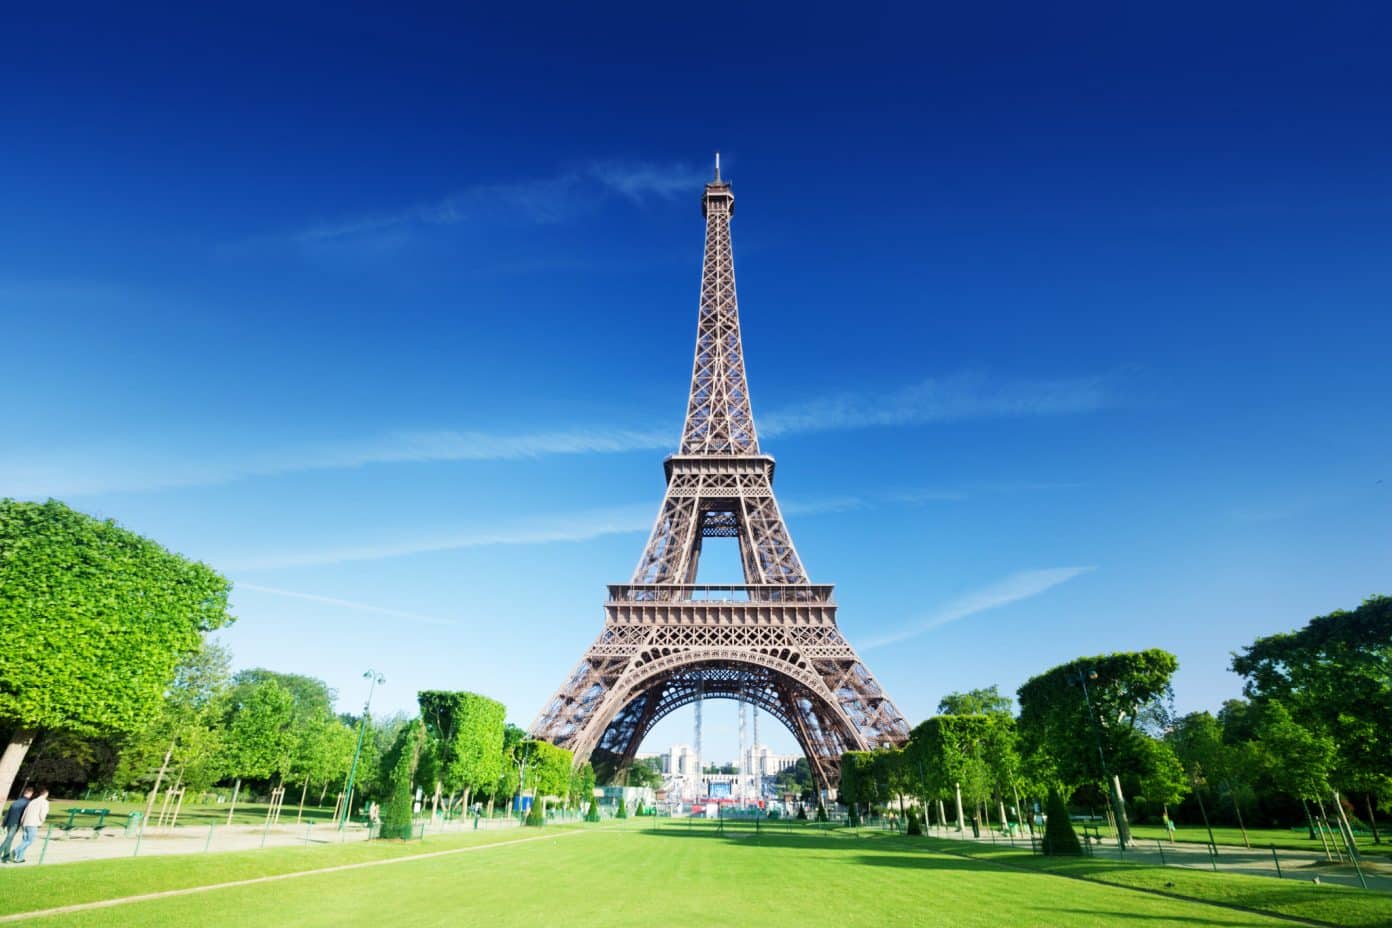 Eiffel Tower Cultural Icon of Paris, France | Found The World